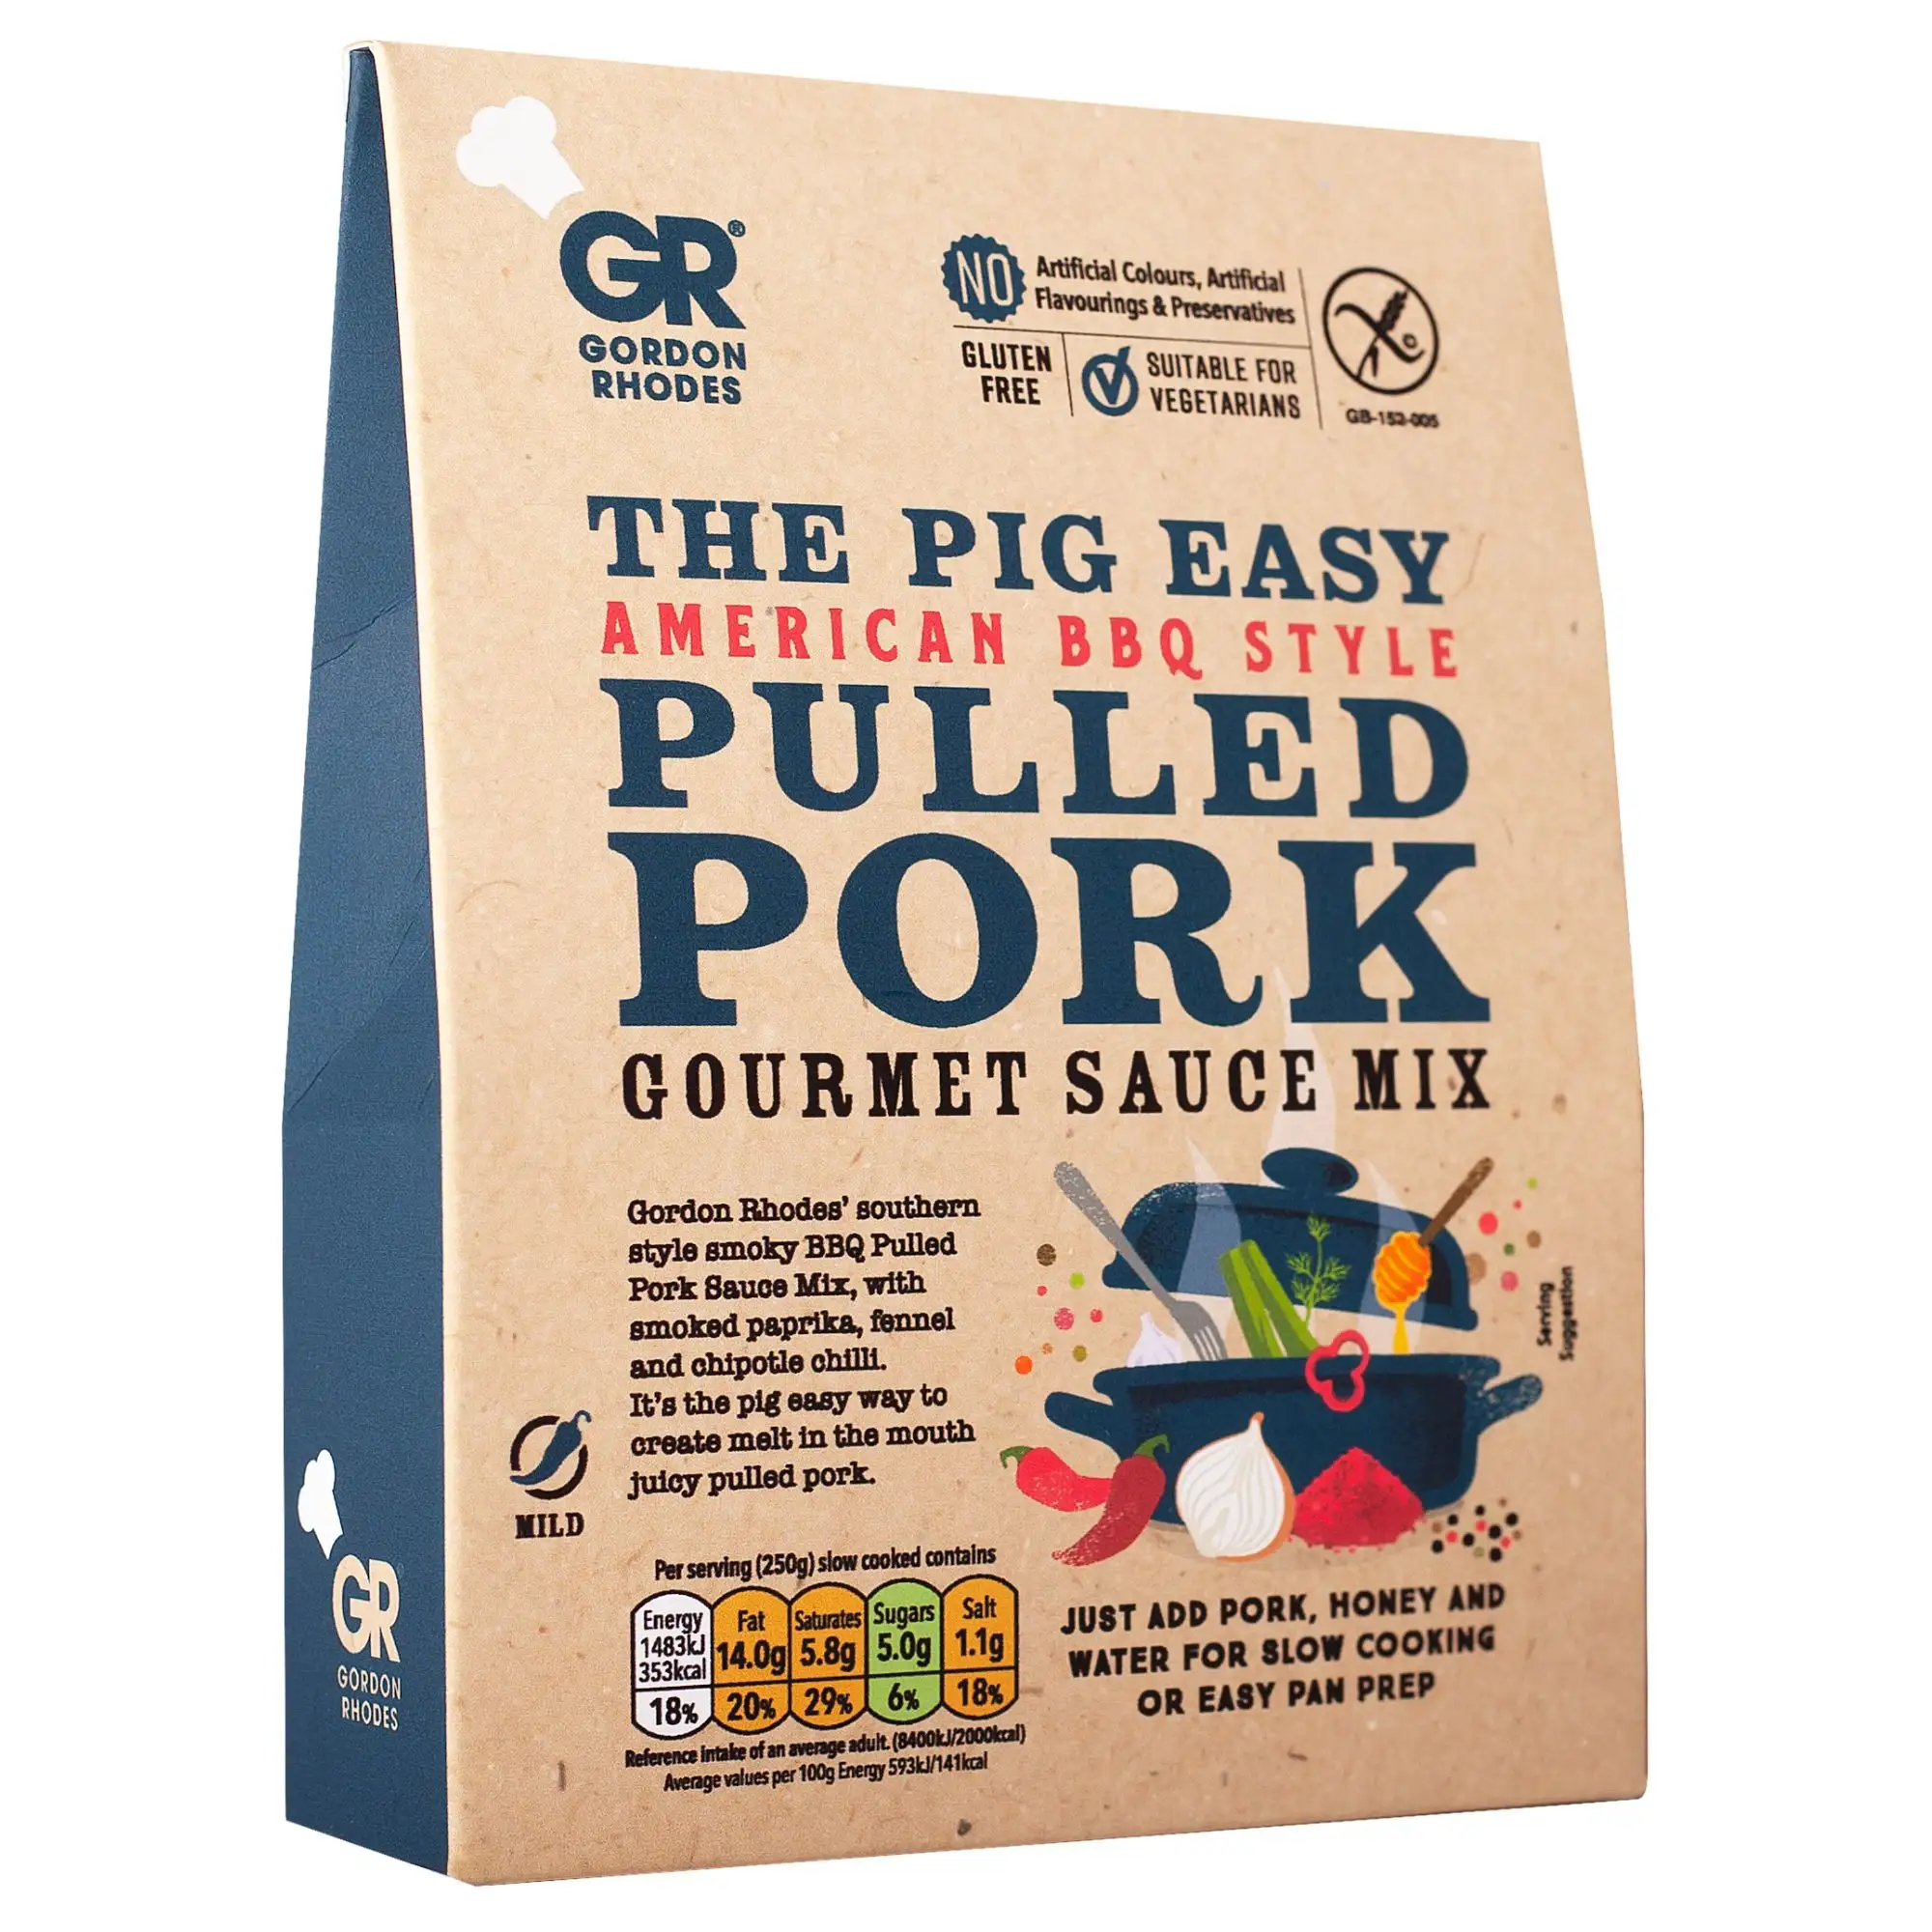 The Pig Easy American BBQ Style Pulled Pork - Gourmet Sauce Mix 75g